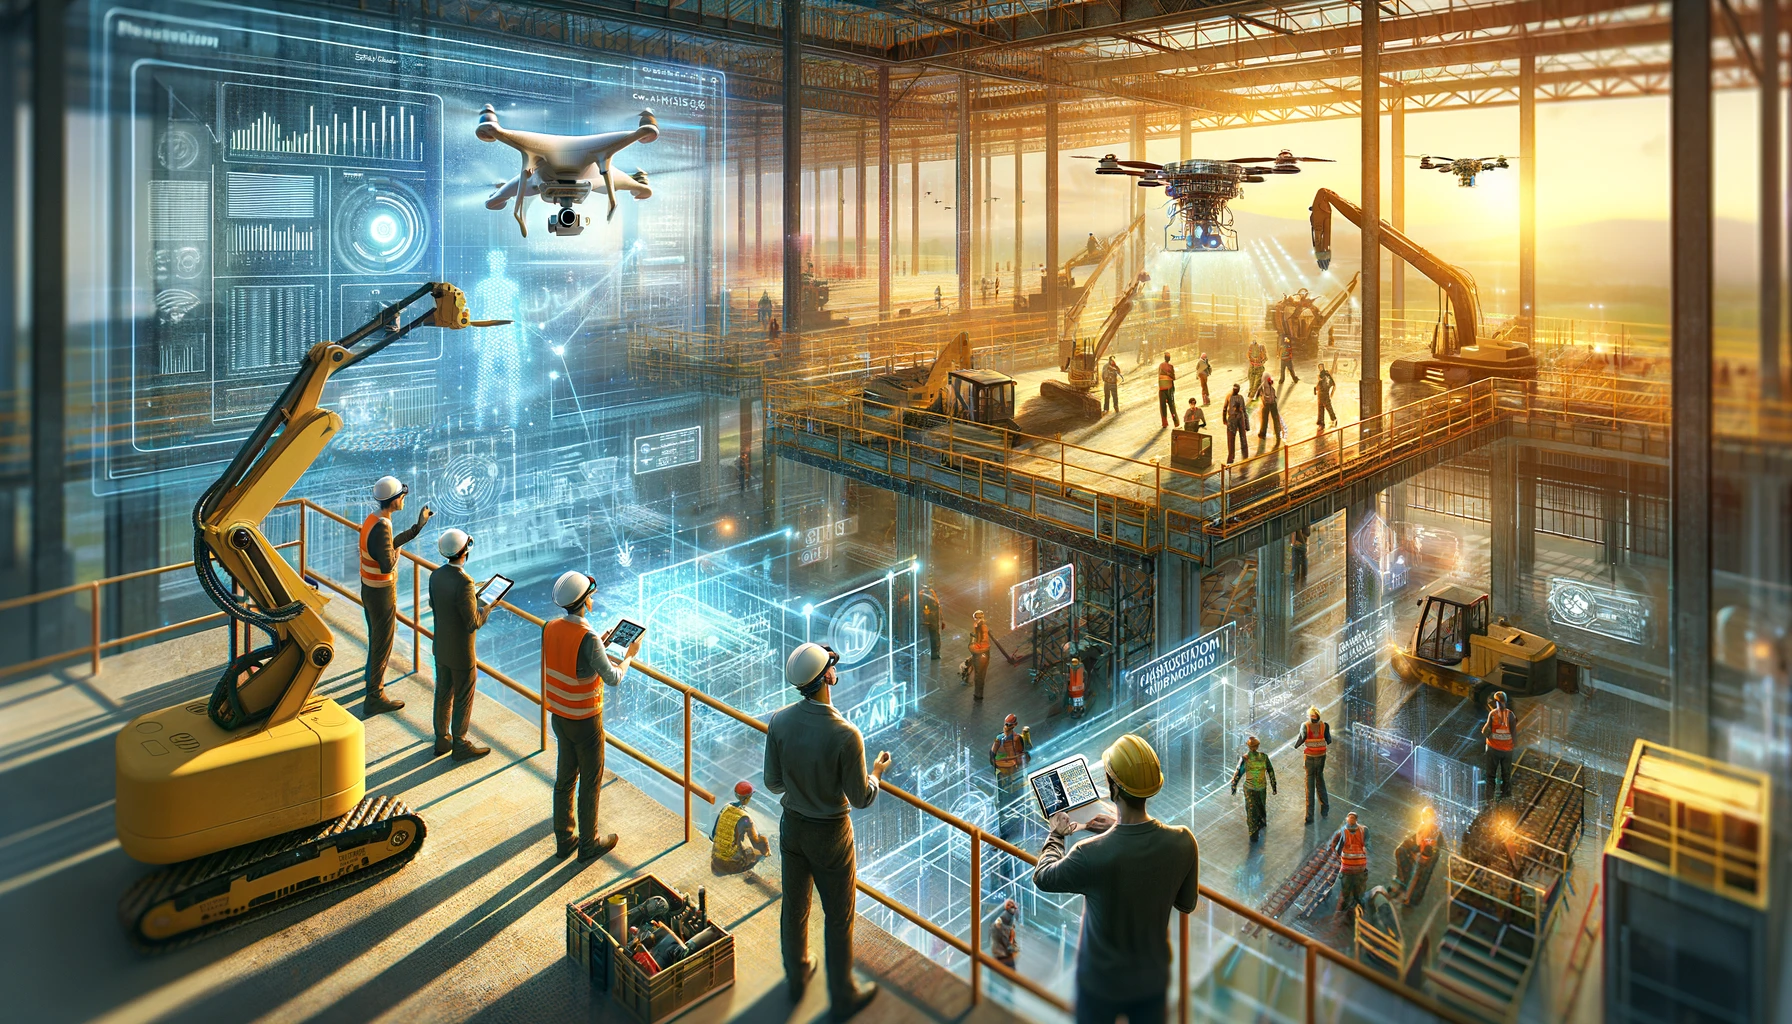 The illustration features a dynamic construction site with engineers and workers using advanced AI technology, including drones and augmented reality, set against a backdrop of modern machinery and digital displays.